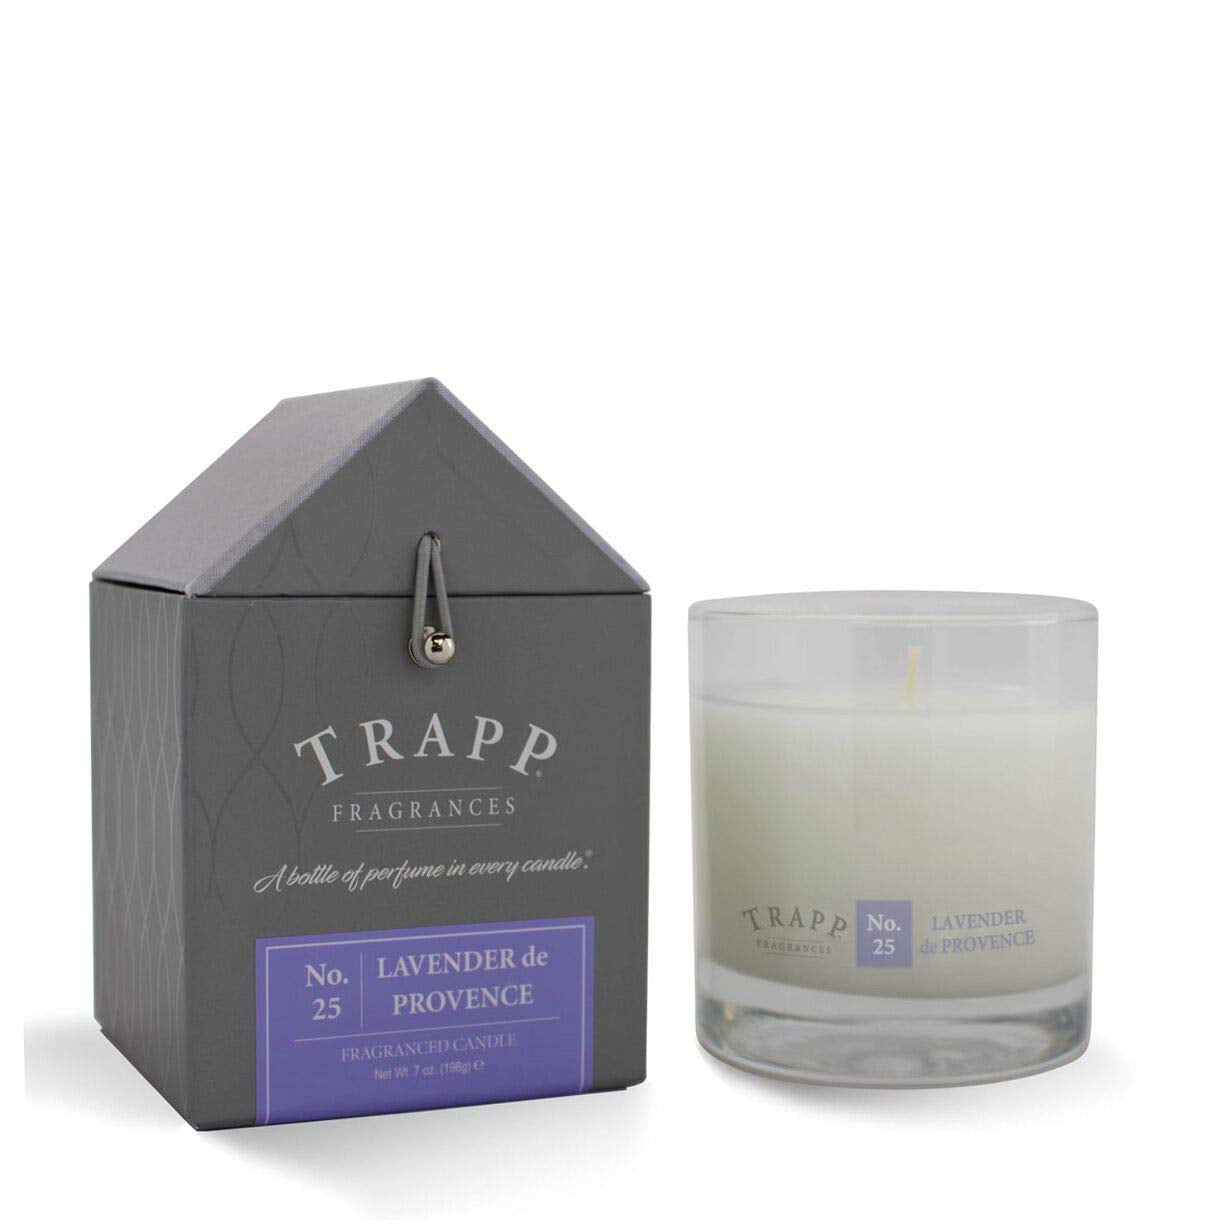 20 Water Poured Scented Candle 7-Ounce Trapp Signature Home Collection No